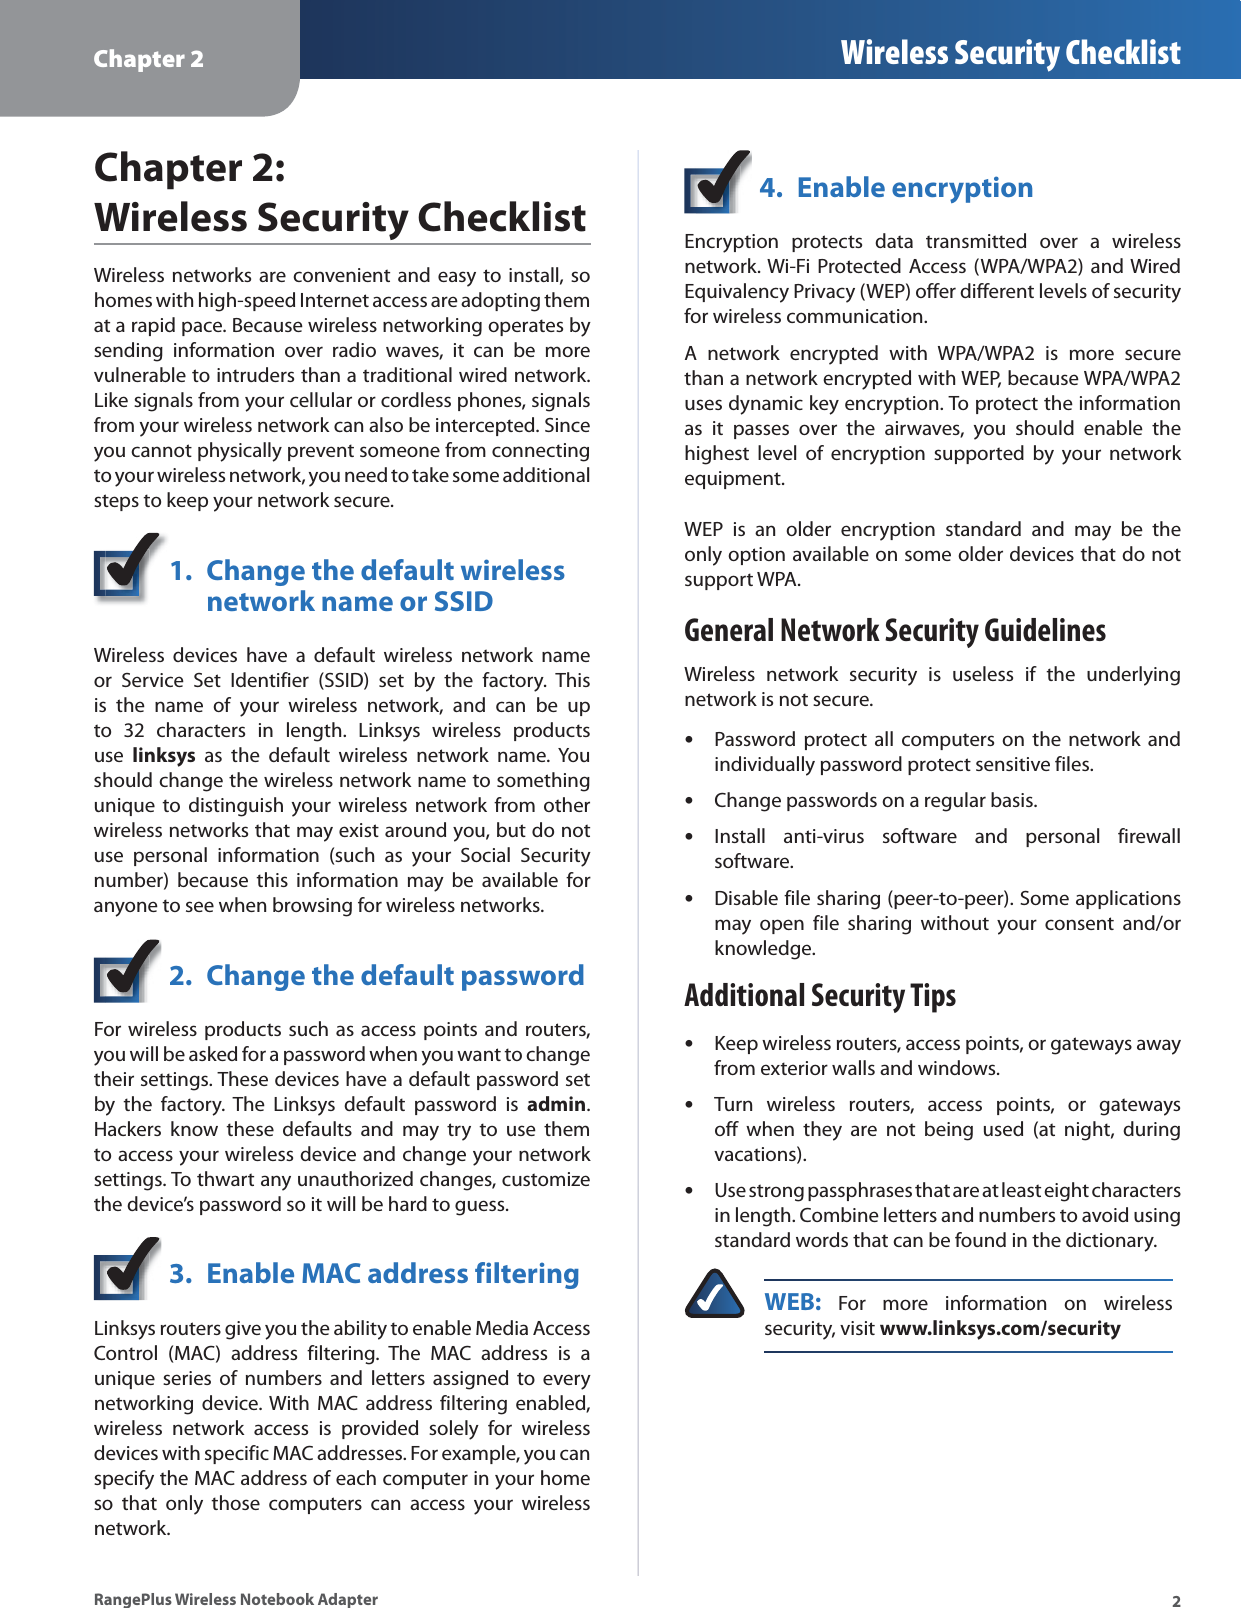 Chapter 2 Wireless Security Checklist2RangePlus Wireless Notebook AdapterChapter 2:Wireless Security ChecklistWireless networks are convenient and easy to install, so homes with high-speed Internet access are adopting them at a rapid pace. Because wireless networking operates by sending information over radio waves, it can be more vulnerable to intruders than a traditional wired network. Like signals from your cellular or cordless phones, signals from your wireless network can also be intercepted. Since you cannot physically prevent someone from connecting to your wireless network, you need to take some additional steps to keep your network secure. 1. Change the default wireless network name or SSIDWireless devices have a default wireless network name or Service Set Identifier (SSID) set by the factory. This is the name of your wireless network, and can be up to 32 characters in length. Linksys wireless products use linksys as the default wireless network name. You should change the wireless network name to something unique to distinguish your wireless network from other wireless networks that may exist around you, but do not use personal information (such as your Social Security number) because this information may be available for anyone to see when browsing for wireless networks. 2. Change the default passwordFor wireless products such as access points and routers, you will be asked for a password when you want to change their settings. These devices have a default password set by the factory. The Linksys default password is admin.Hackers know these defaults and may try to use them to access your wireless device and change your network settings. To thwart any unauthorized changes, customize the device’s password so it will be hard to guess.3. Enable MAC address filteringLinksys routers give you the ability to enable Media Access Control (MAC) address filtering. The MAC address is a unique series of numbers and letters assigned to every networking device. With MAC address filtering enabled, wireless network access is provided solely for wireless devices with specific MAC addresses. For example, you can specify the MAC address of each computer in your home so that only those computers can access your wireless network. 4. Enable encryptionEncryption protects data transmitted over a wireless network. Wi-Fi Protected Access (WPA/WPA2) and Wired Equivalency Privacy (WEP) offer different levels of security for wireless communication.A network encrypted with WPA/WPA2 is more secure than a network encrypted with WEP, because WPA/WPA2 uses dynamic key encryption. To protect the information as it passes over the airwaves, you should enable the highest level of encryption supported by your network equipment. WEP is an older encryption standard and may be the only option available on some older devices that do not support WPA.General Network Security GuidelinesWireless network security is useless if the underlying network is not secure. Password protect all computers on the network and individually password protect sensitive files.Change passwords on a regular basis.Install anti-virus software and personal firewall software.Disable file sharing (peer-to-peer). Some applications may open file sharing without your consent and/or knowledge.Additional Security TipsKeep wireless routers, access points, or gateways away from exterior walls and windows.Turn wireless routers, access points, or gateways off when they are not being used (at night, during vacations).Use strong passphrases that are at least eight characters in length. Combine letters and numbers to avoid using standard words that can be found in the dictionary. WEB: For more information on wireless security, visit www.linksys.com/security•••••••